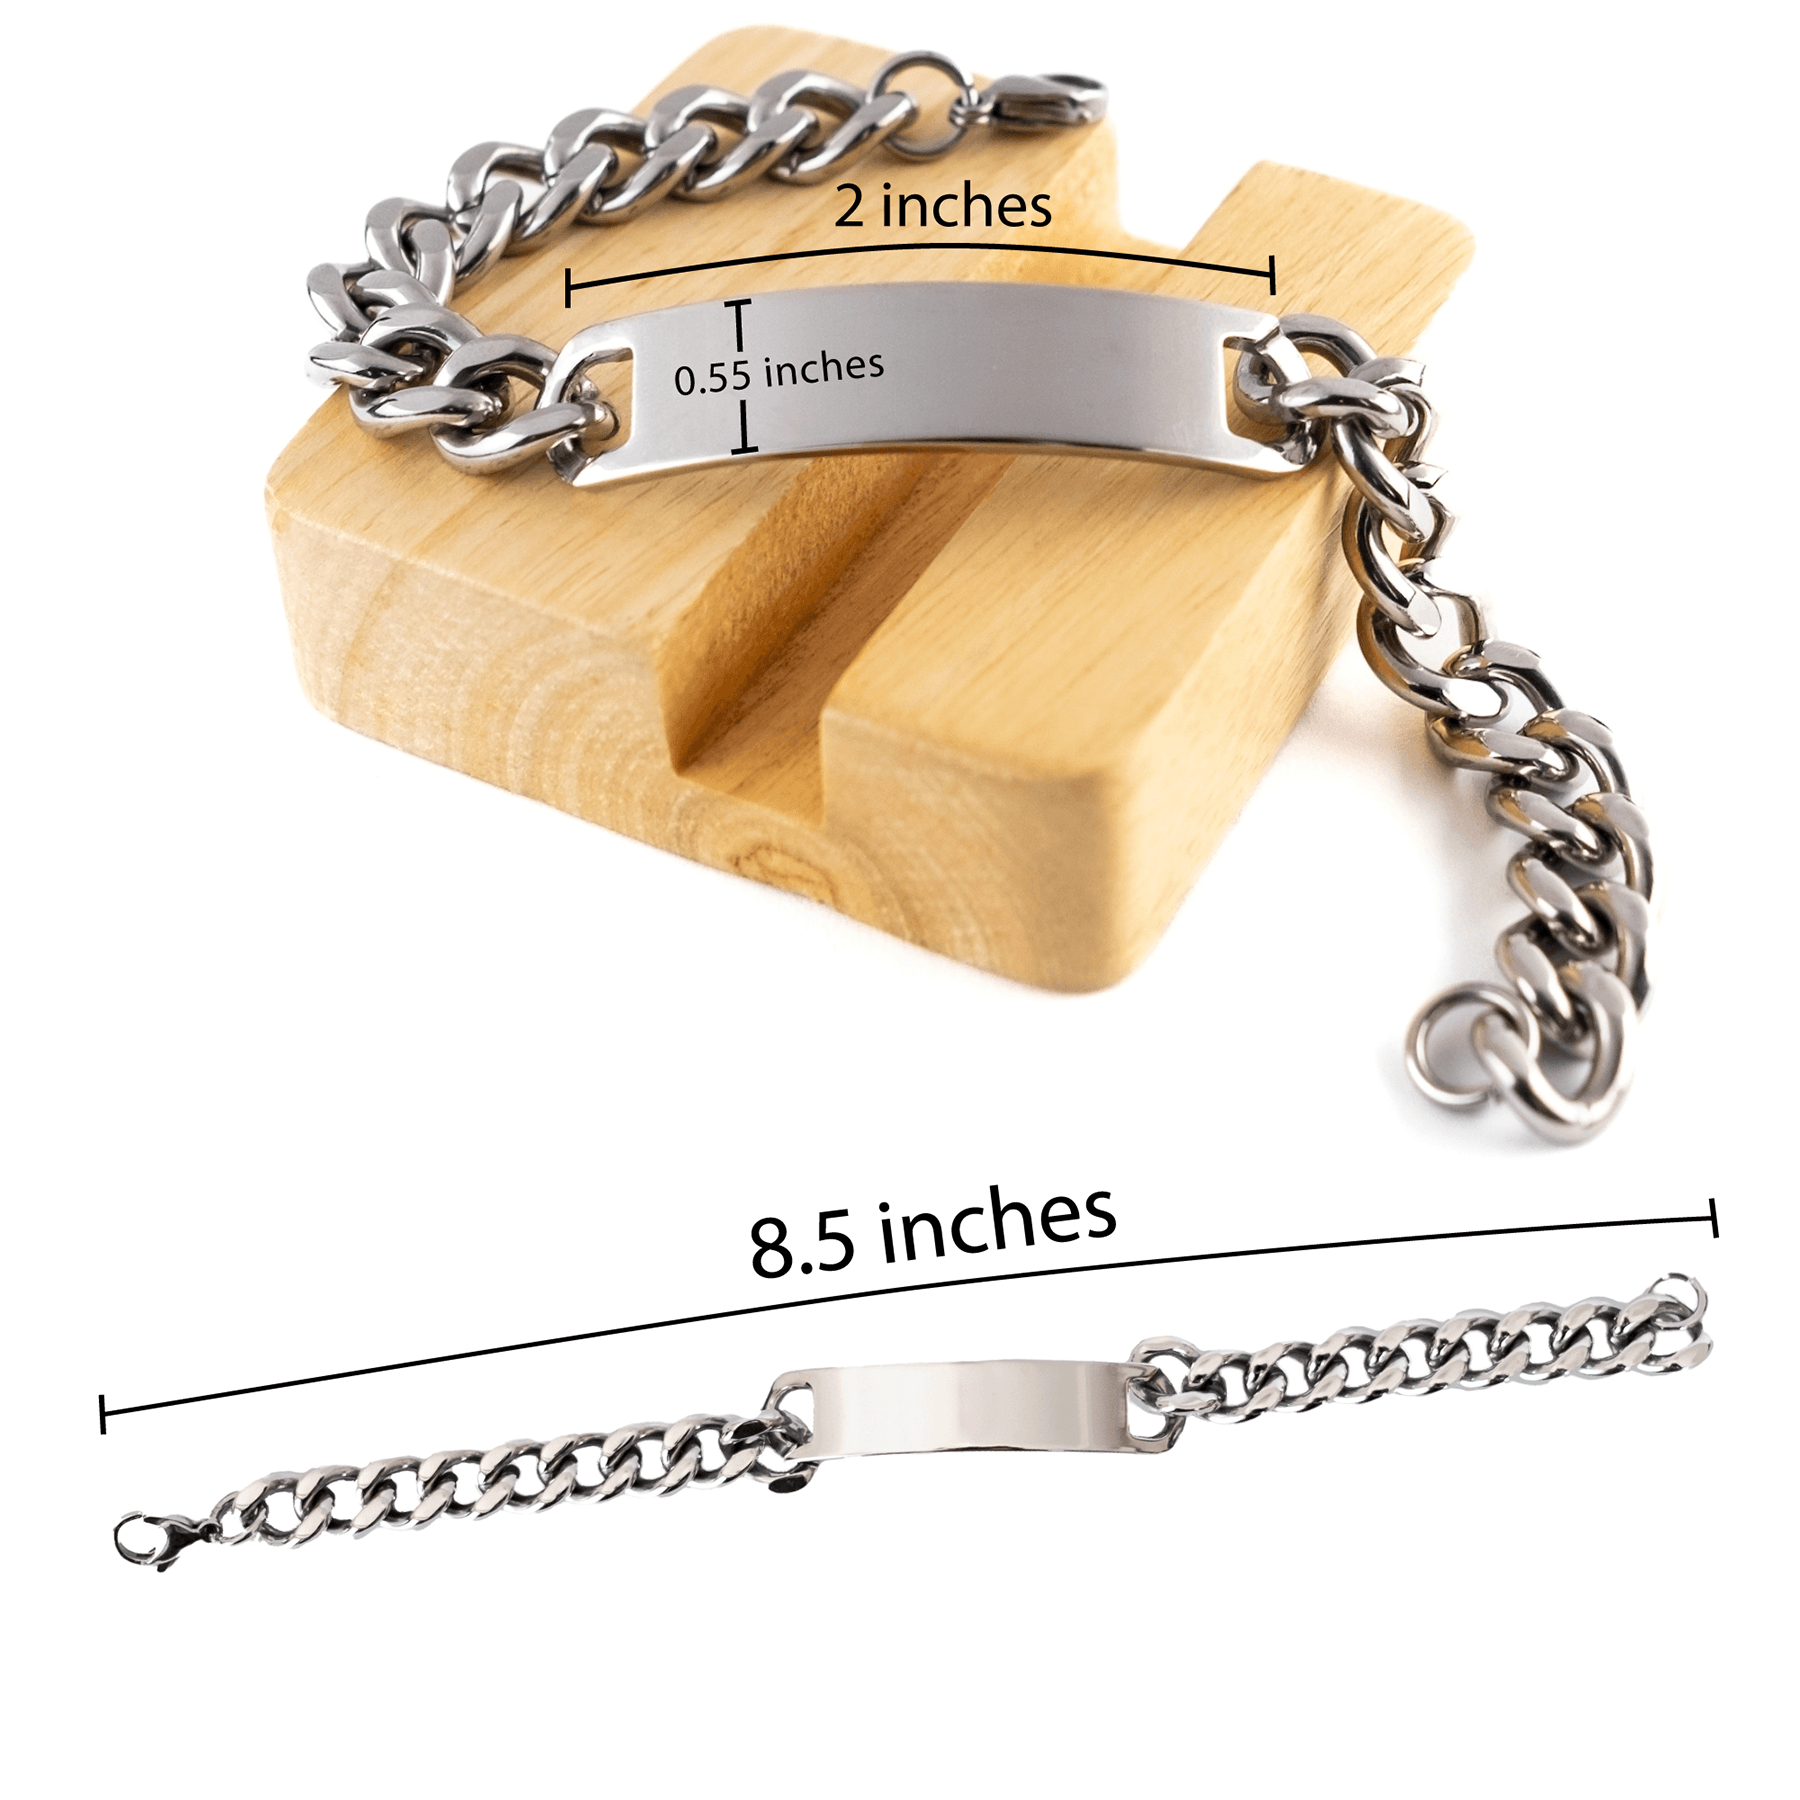 Dealer Cuban Chain Link Engraved Bracelet - Thanks for being who you are - Birthday Christmas Jewelry Gifts Coworkers Colleague Boss - Mallard Moon Gift Shop